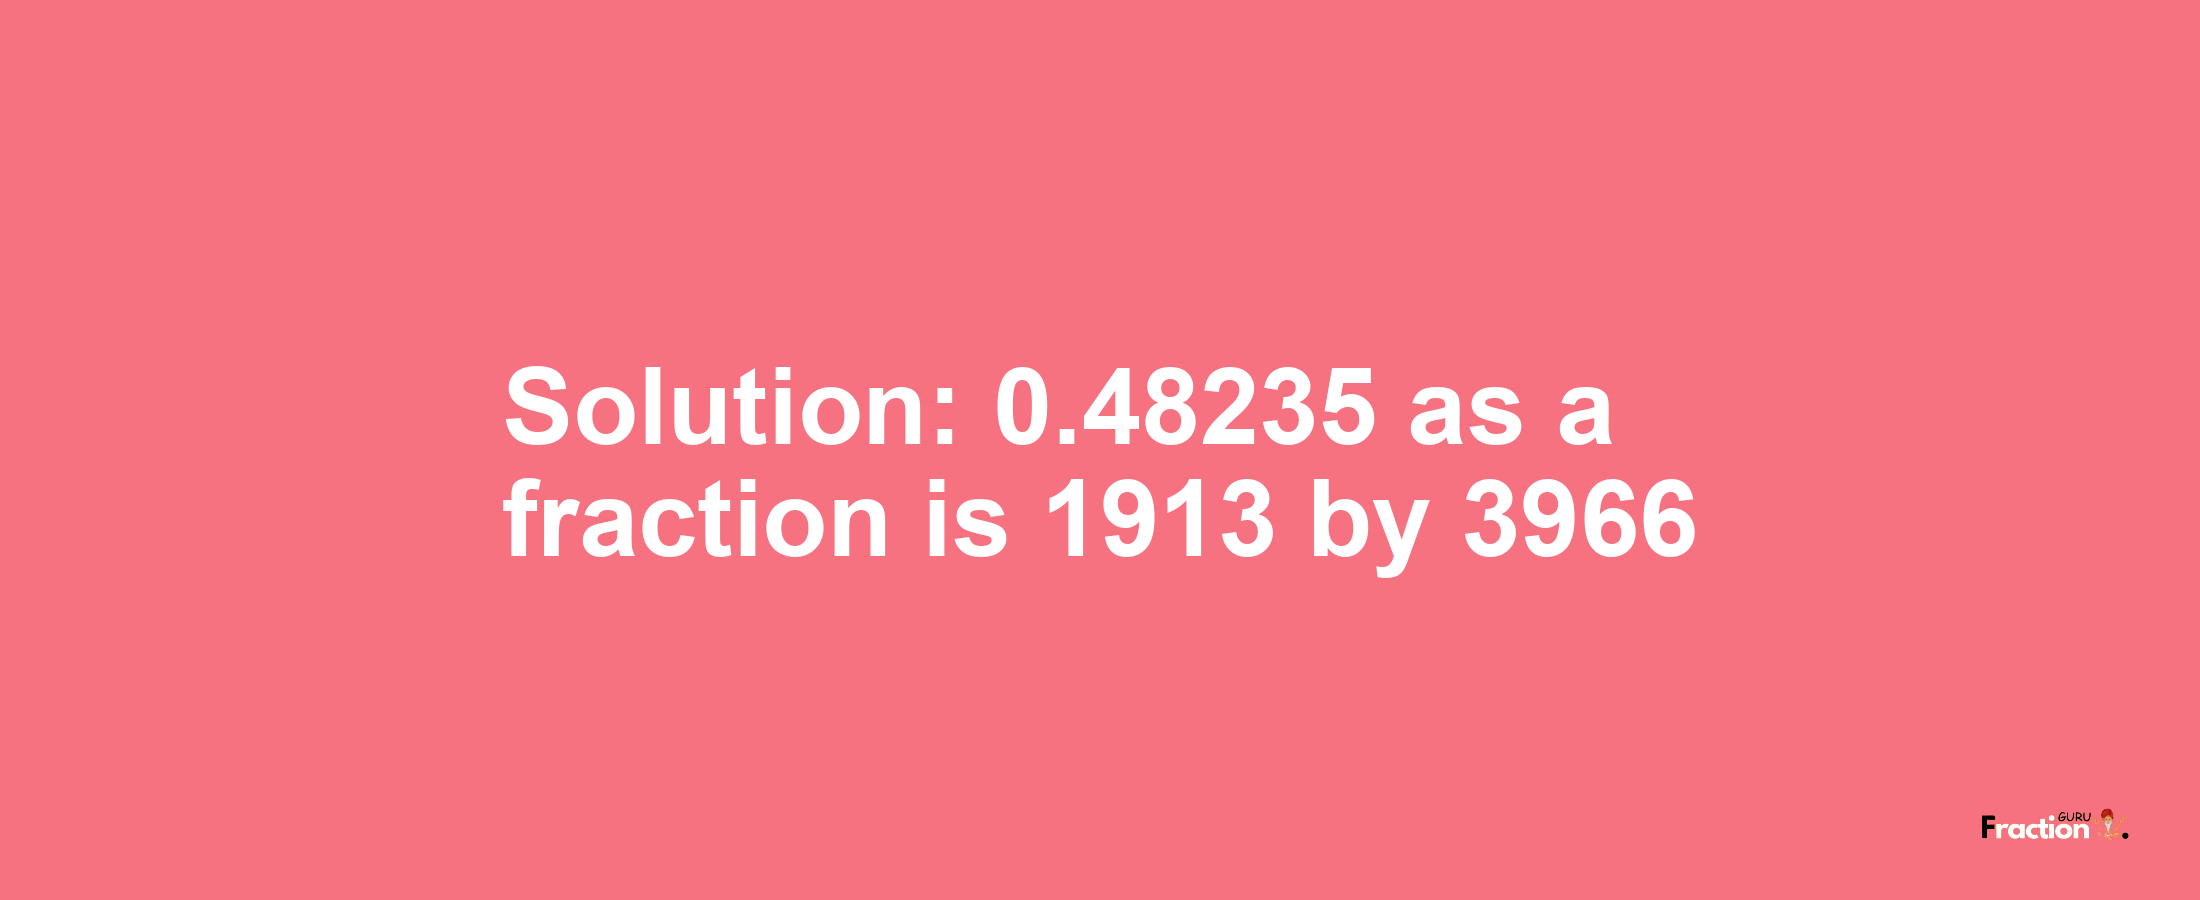 Solution:0.48235 as a fraction is 1913/3966